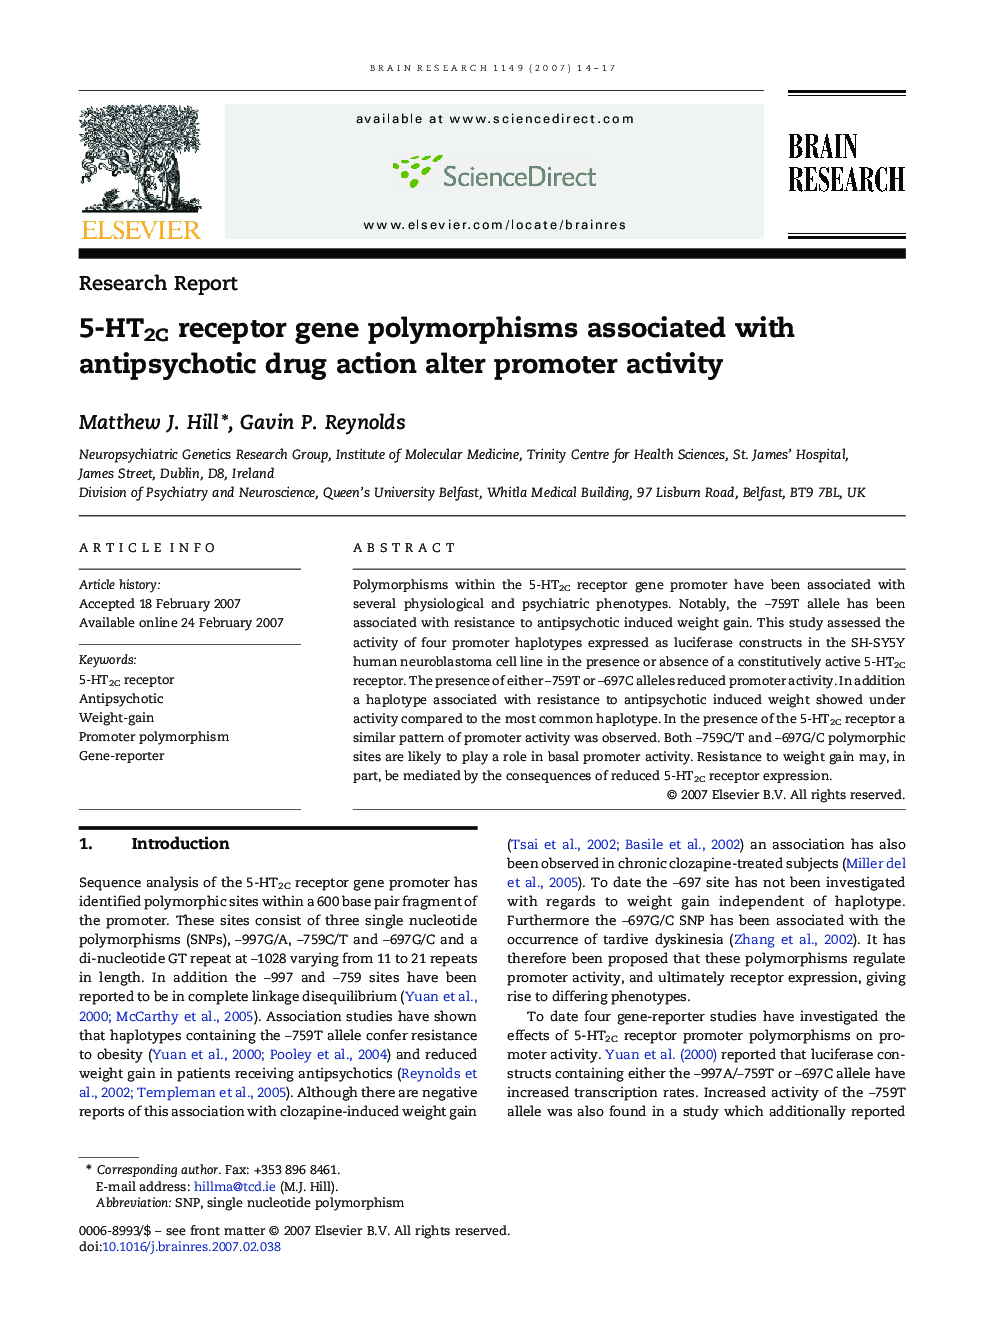 5-HT2C receptor gene polymorphisms associated with antipsychotic drug action alter promoter activity